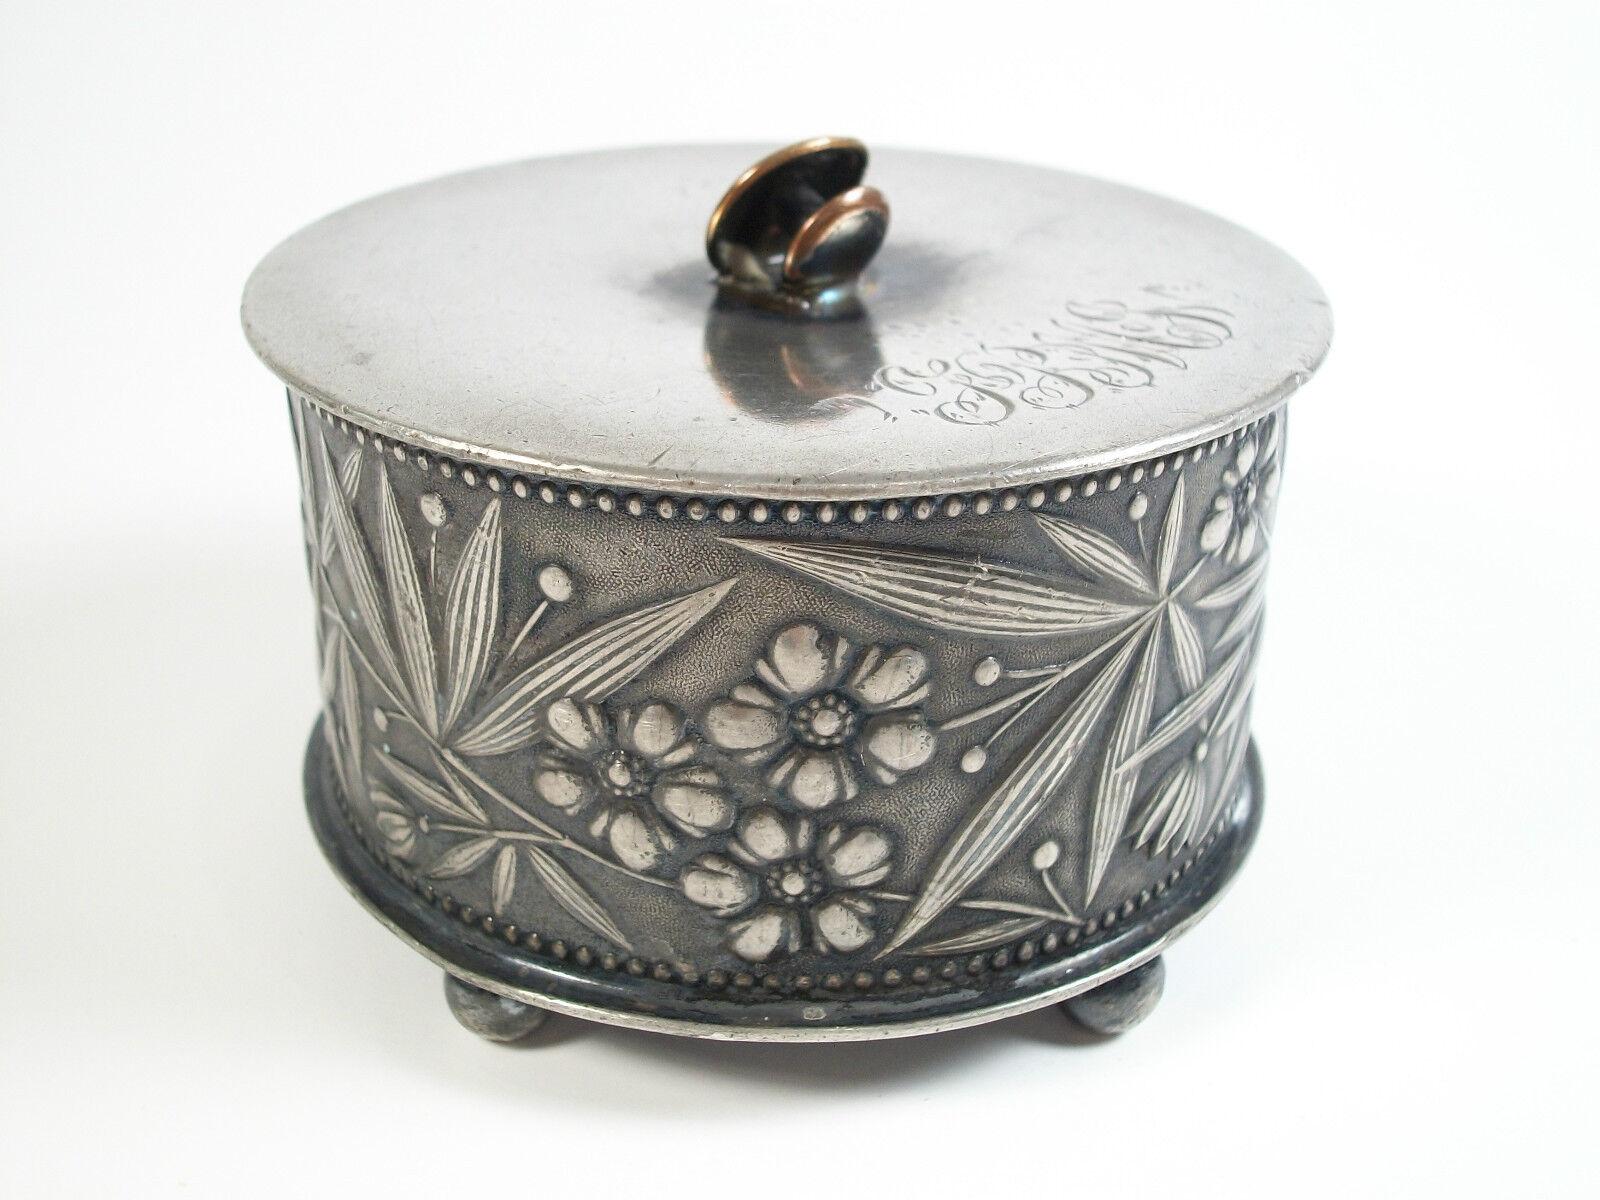 SIMPSON HALL MILLER & CO. - Arts & Crafts silver plate jewelry/cuff-links box - 'TPMJ' monogram - delicate tooling - cuff-link finial/handle - signed and marked on the base 'QUADRUPLE PLATE' - United States - late 19th century.

Excellent antique